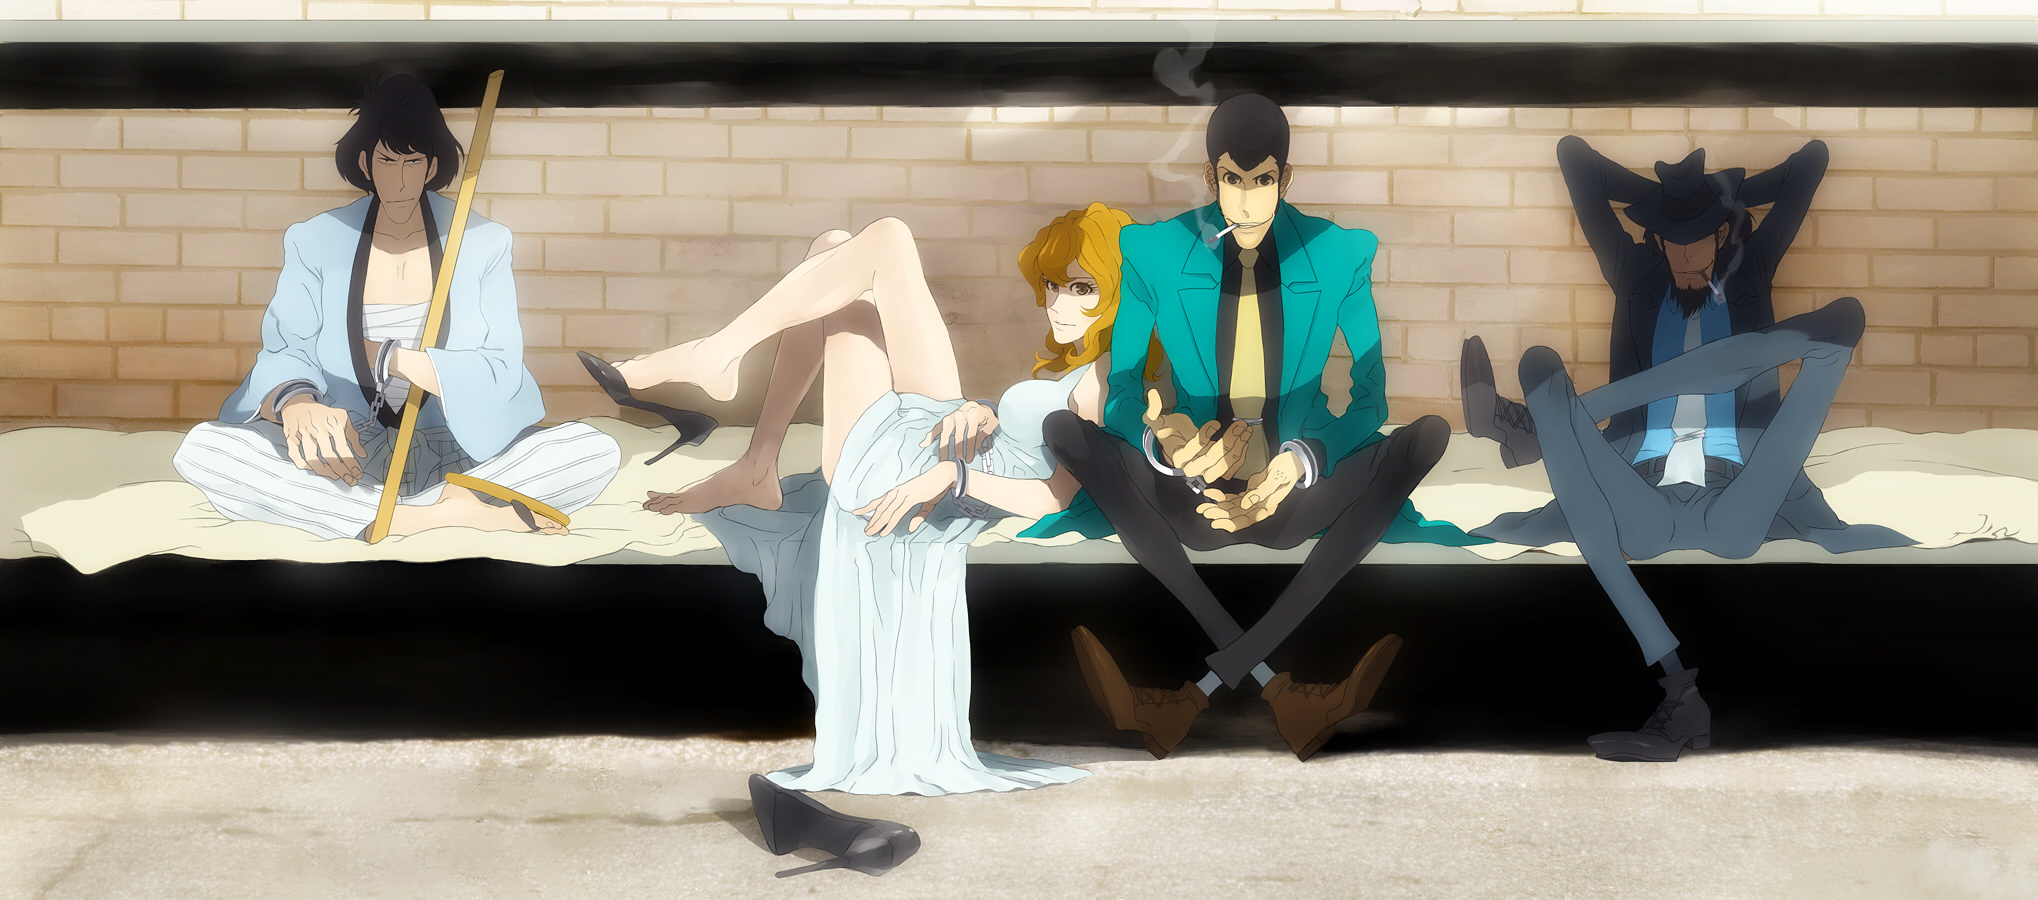 Lupin The Third Wallpaper And Background Image - Lupin The Third Uncensored , HD Wallpaper & Backgrounds